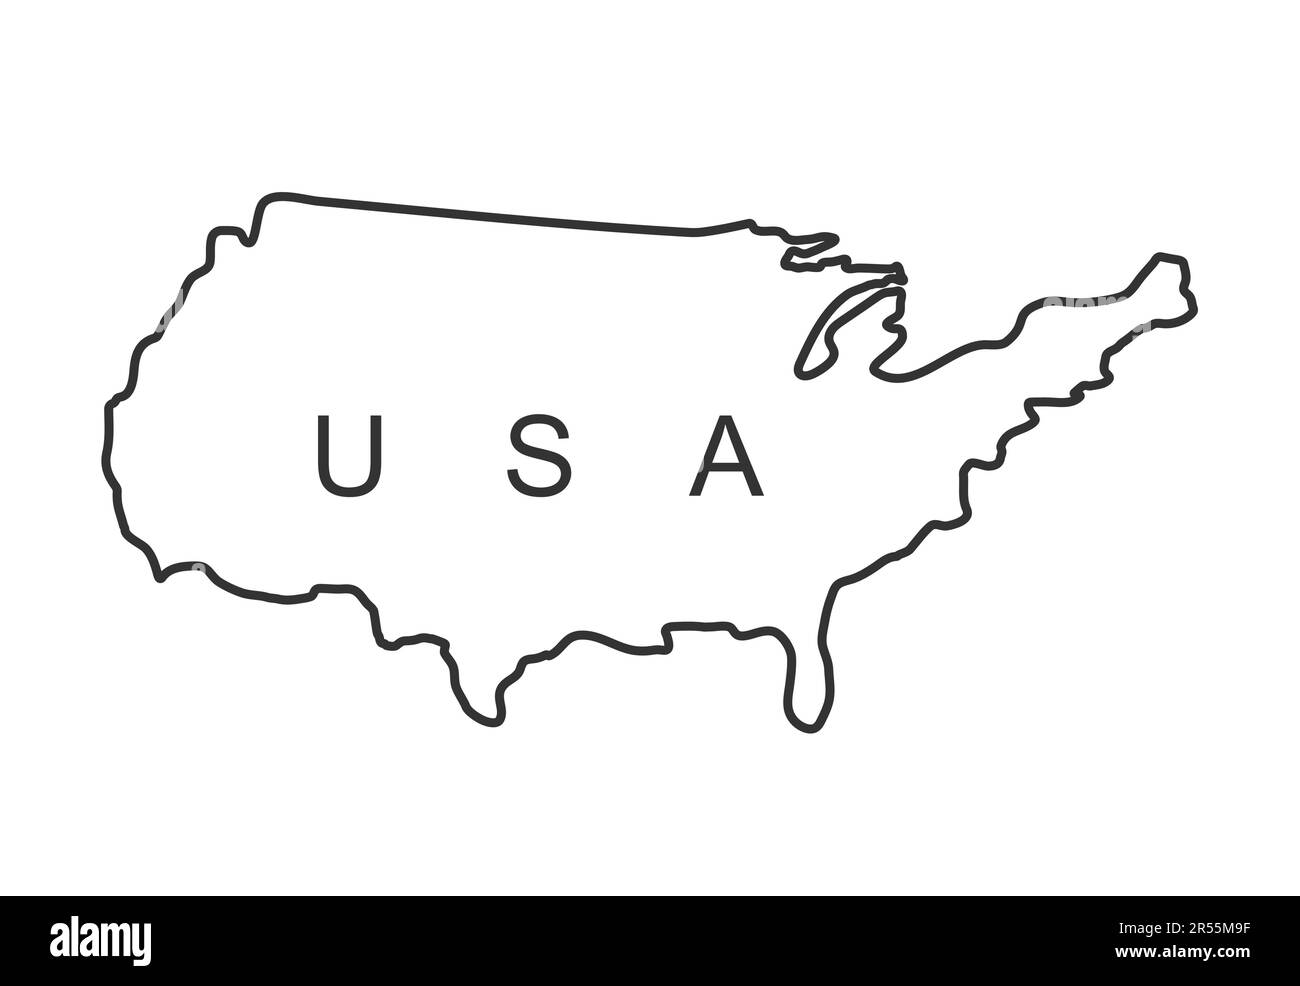 USA map in a stroke. Outline of the USA in black on a white background. USA vector map Stock Vector